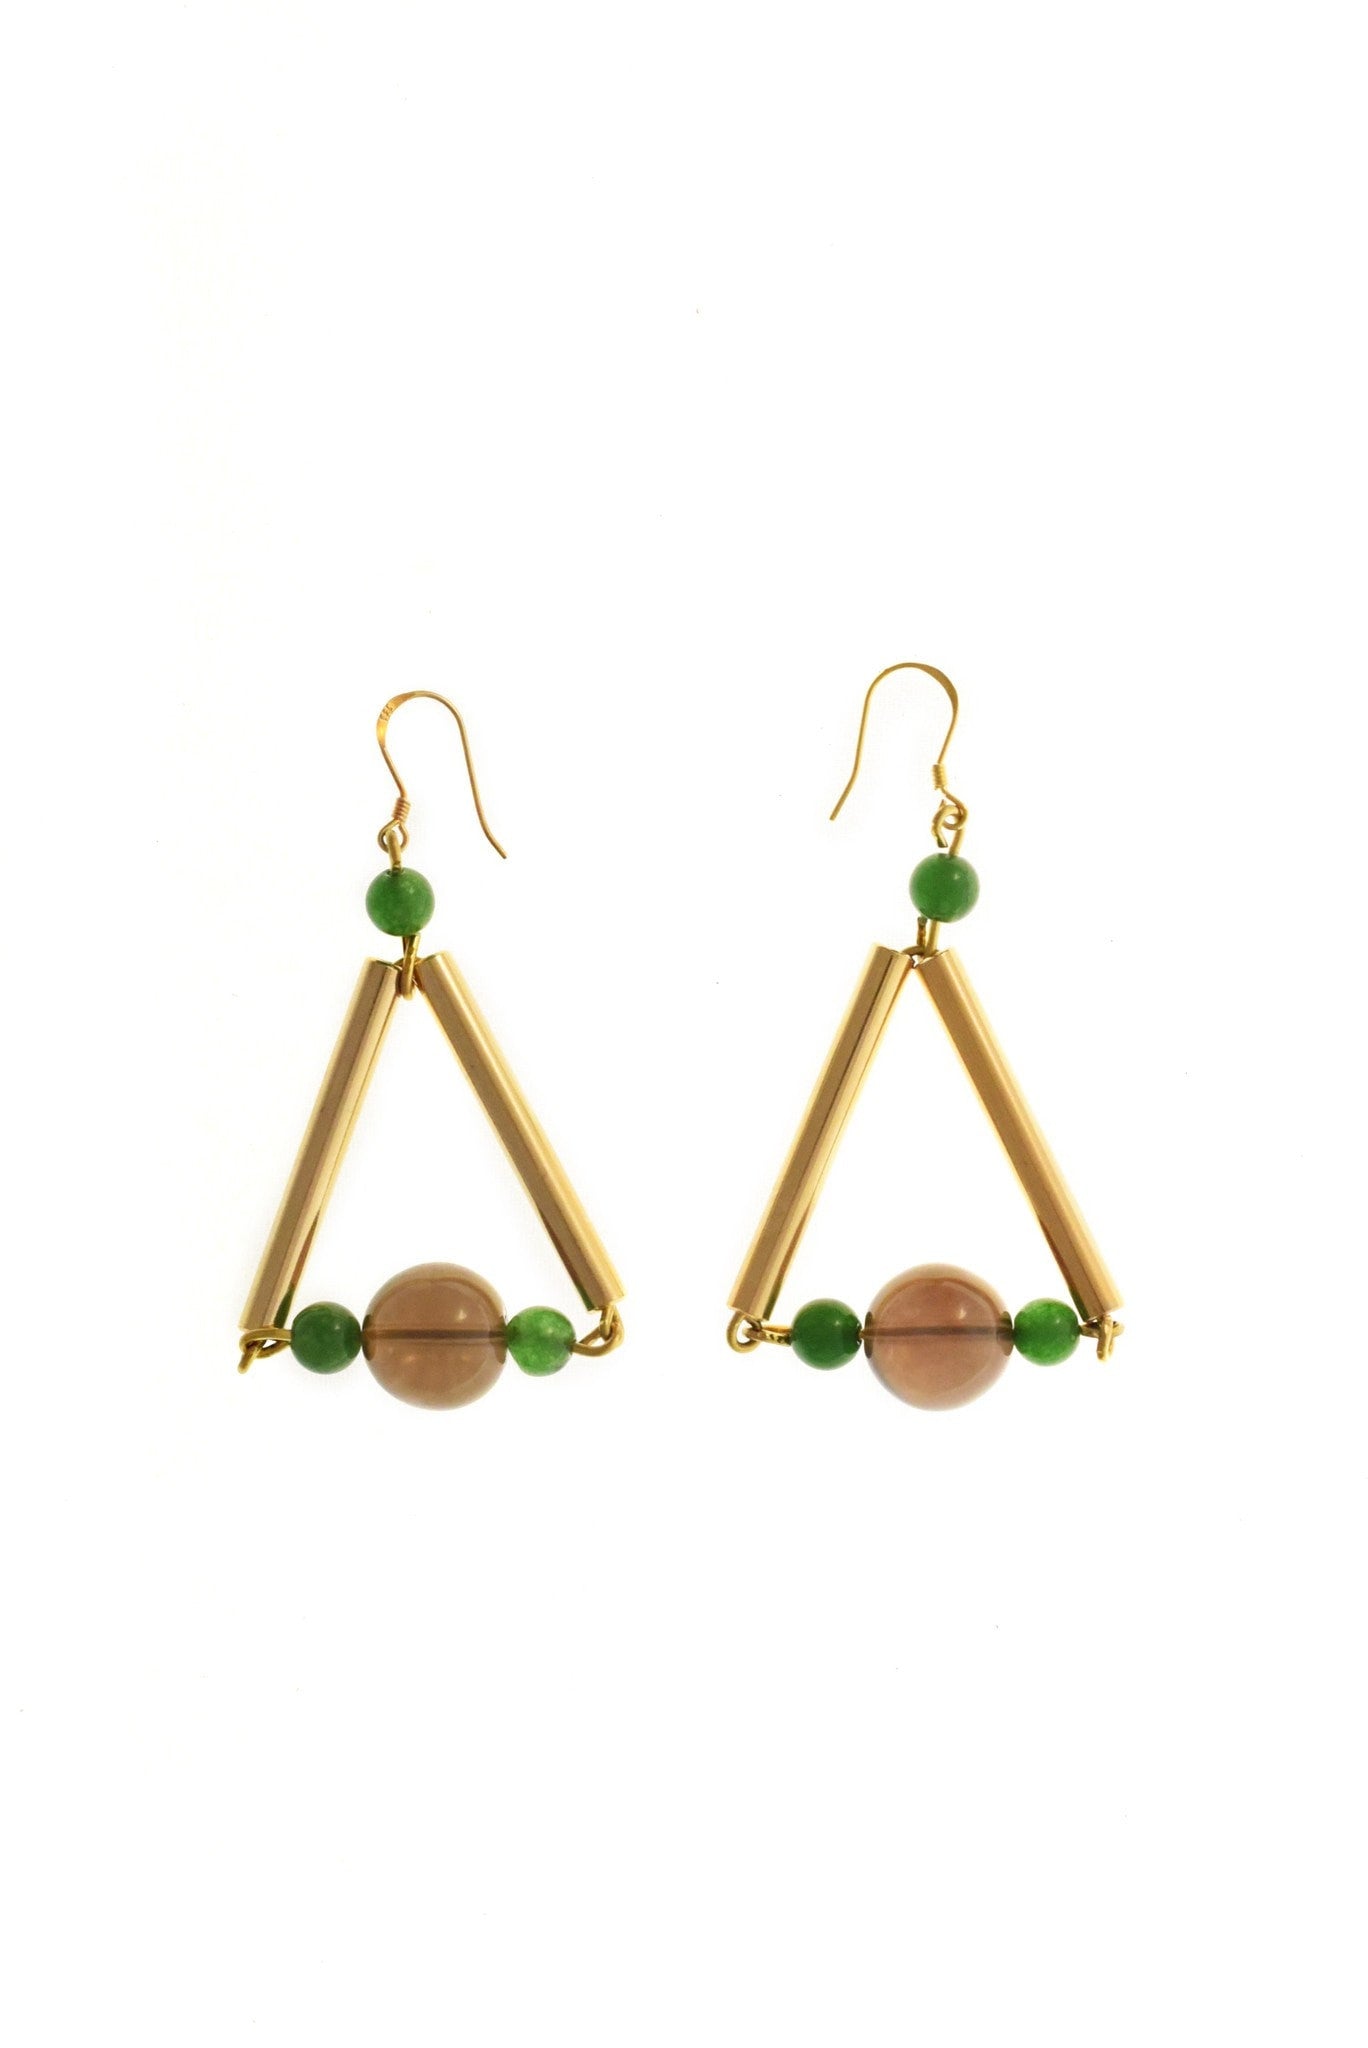 Triangle earrings made of hand-cut, hand polished and galvanized brass, smokey quartz, jade and gold plated sterling silver.